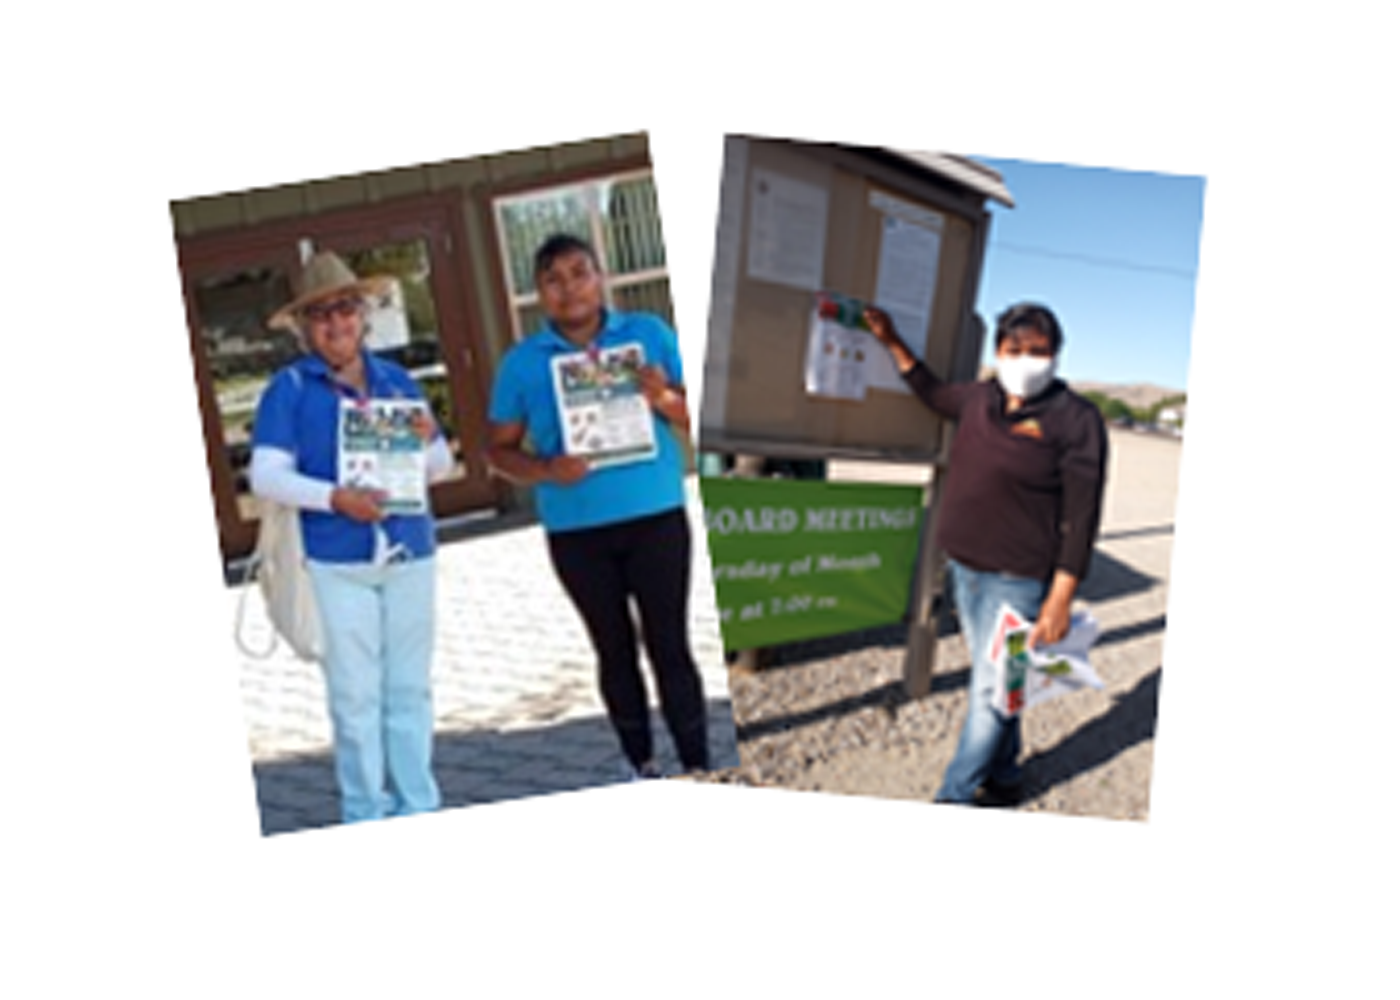 2 photo collage of adults holding nutrition education materials displayed in a community.